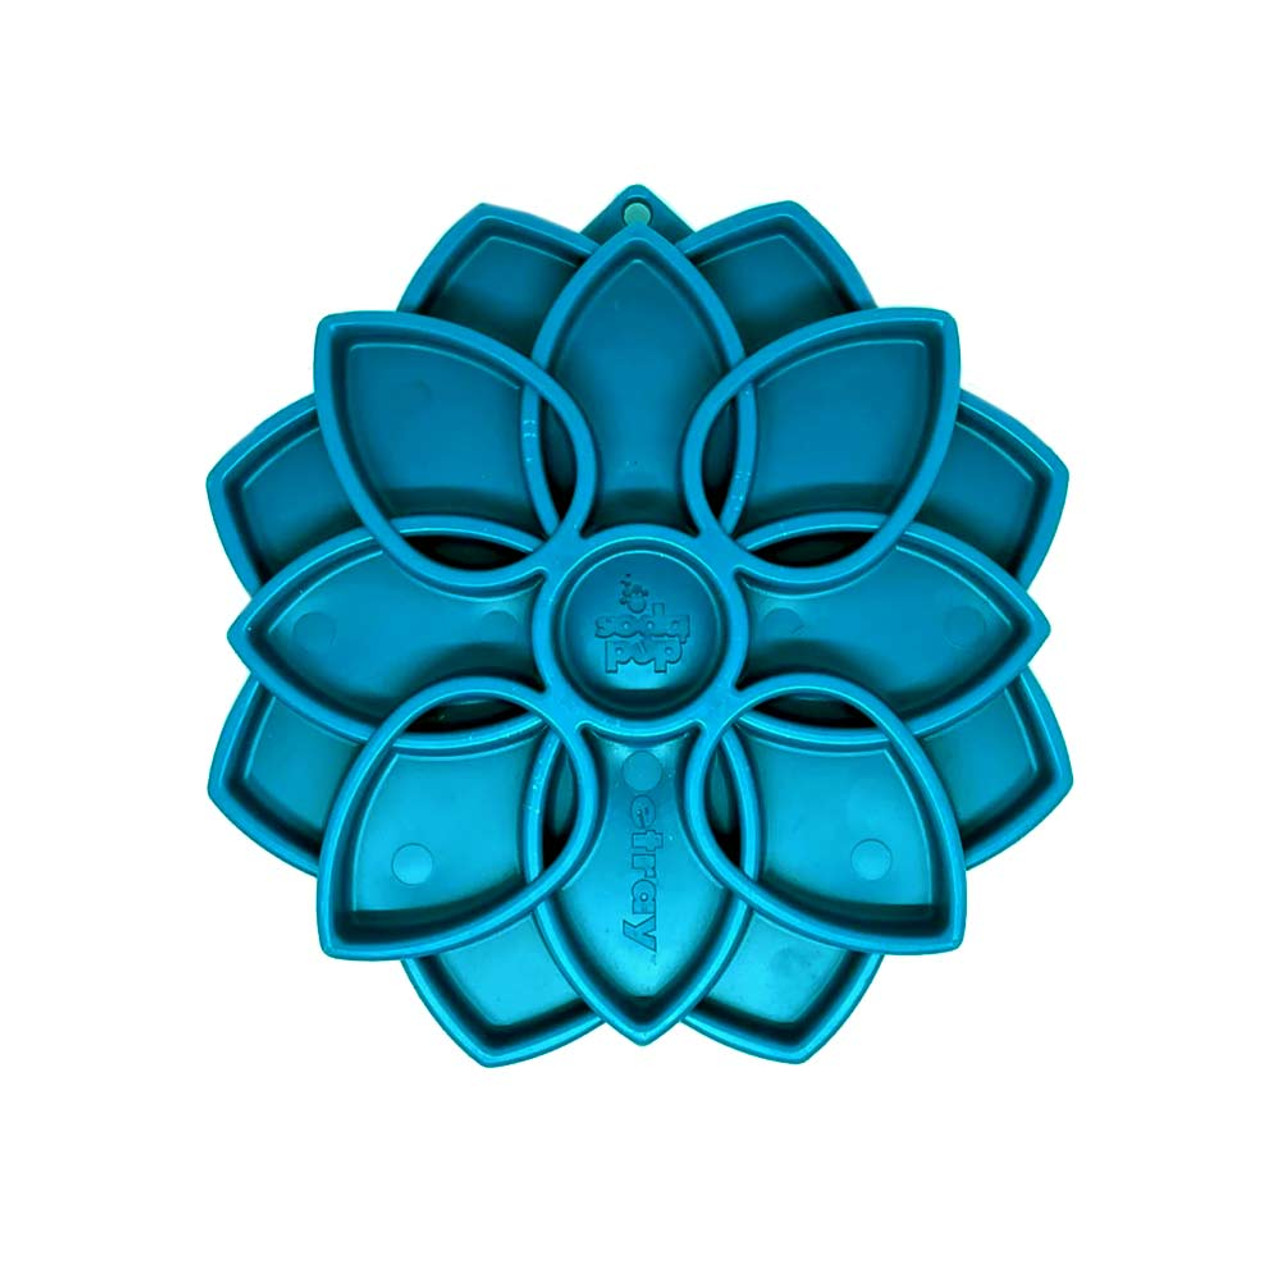 https://cdn11.bigcommerce.com/s-qfetj9wx4u/images/stencil/1280x1280/products/356/1204/Poko-and-Oki-SodaPup-Enrichment-Lick-Tray-Mandala-Blue-etray-for-dogs-01__42278.1691689937.jpg?c=1